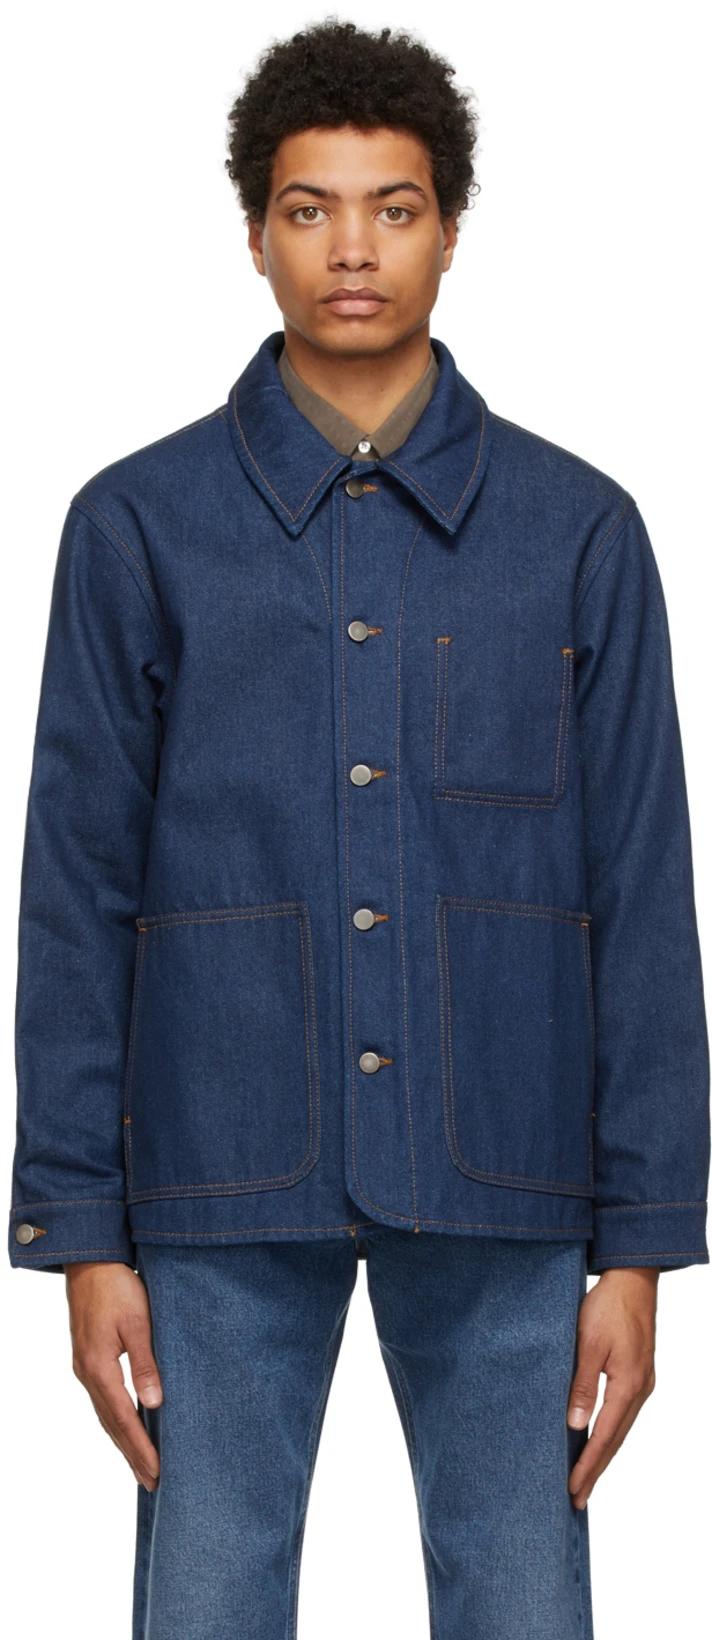 Indigo Another 1.0 Denim Jacket by ANOTHER ASPECT